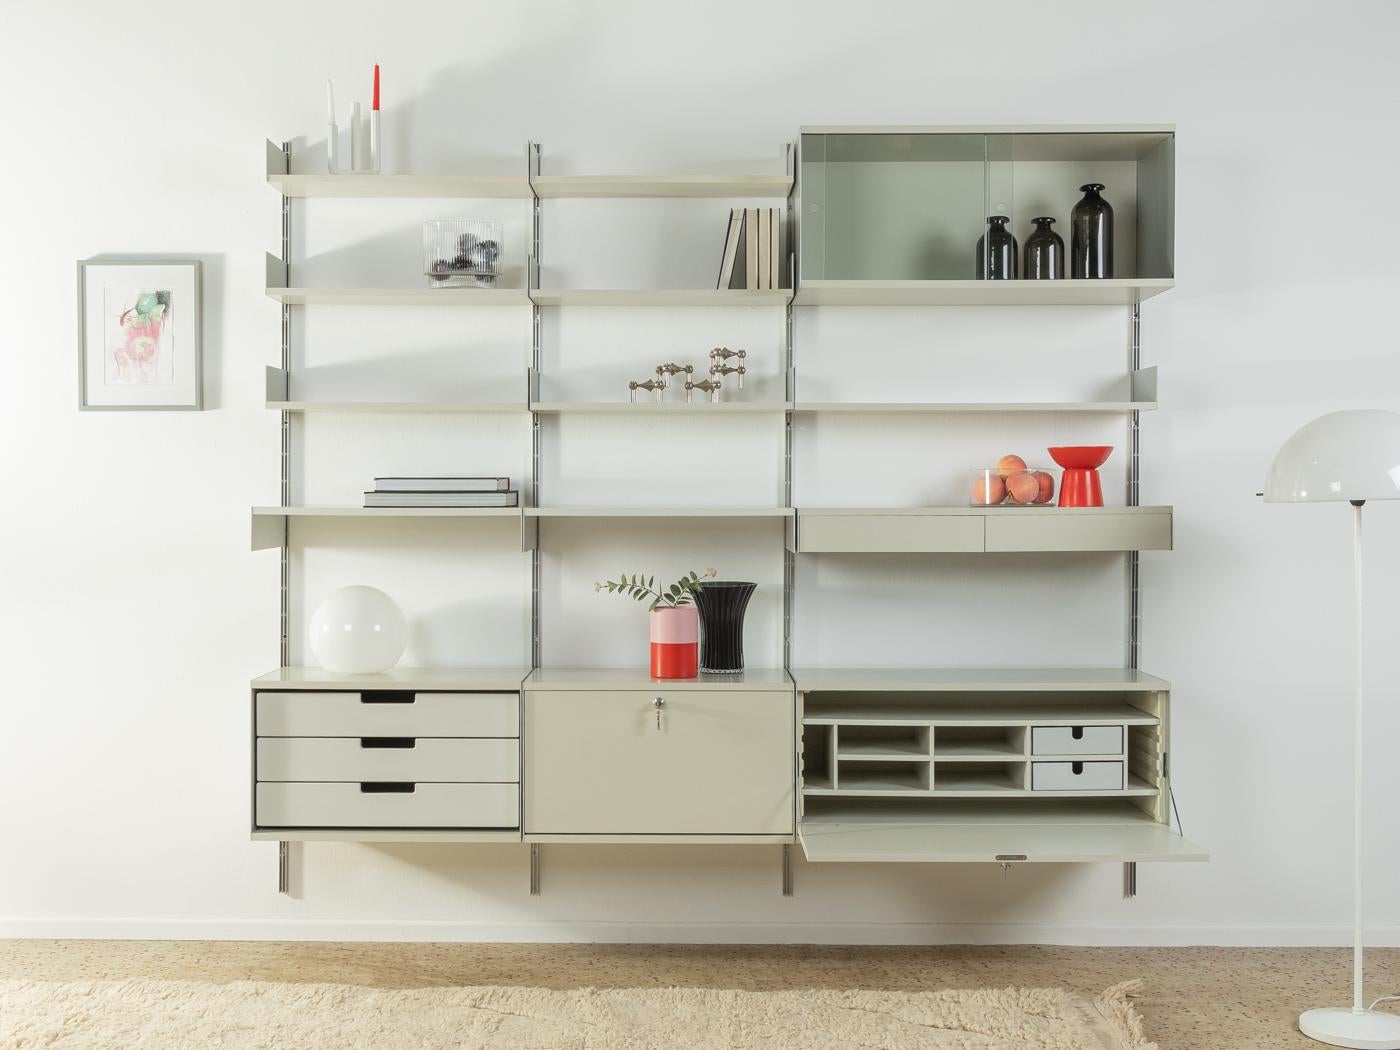 Modular 606 shelving system by Dieter Rams for Vitsœ from the 1960s. High-quality construction consisting of four aluminium E Tracks, nine shelves, a cabinet with three drawers, a cabinet with two glass doors, two cabinets with fold-down doors with